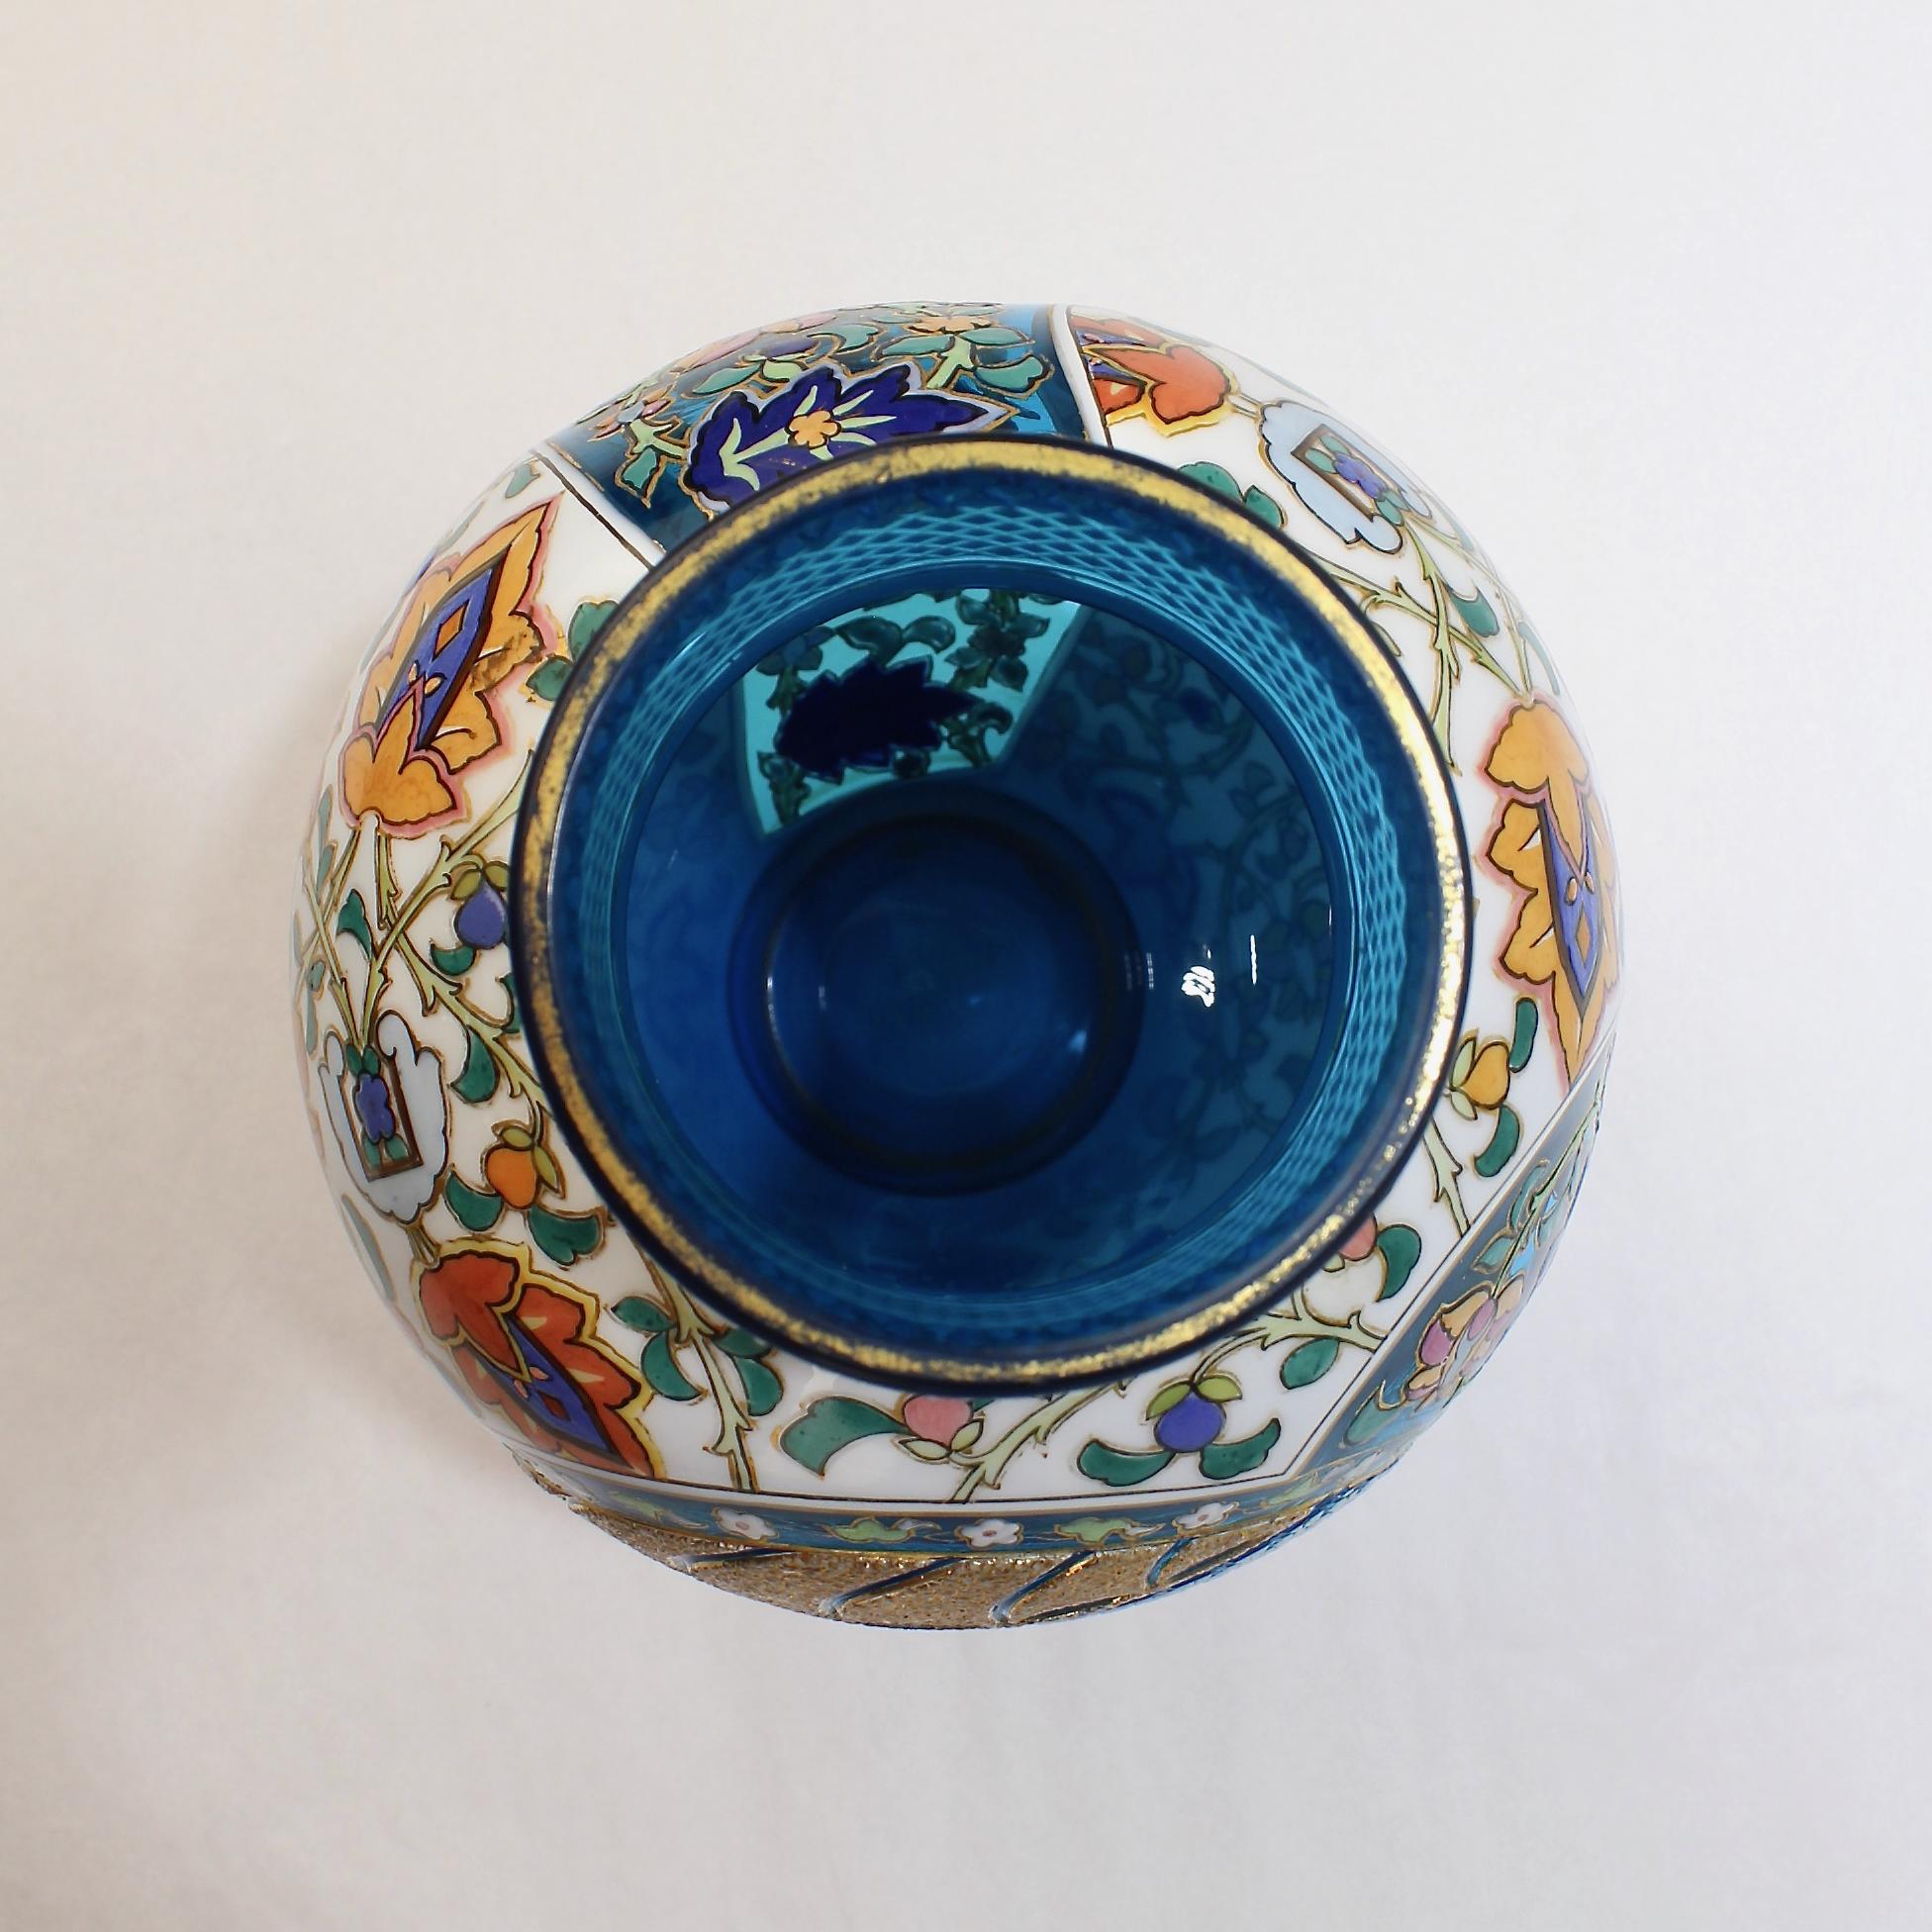 Antique Bohemian Aesthetic Movement Cased Blue and White Enameled Cut Glass Vase In Good Condition For Sale In Philadelphia, PA